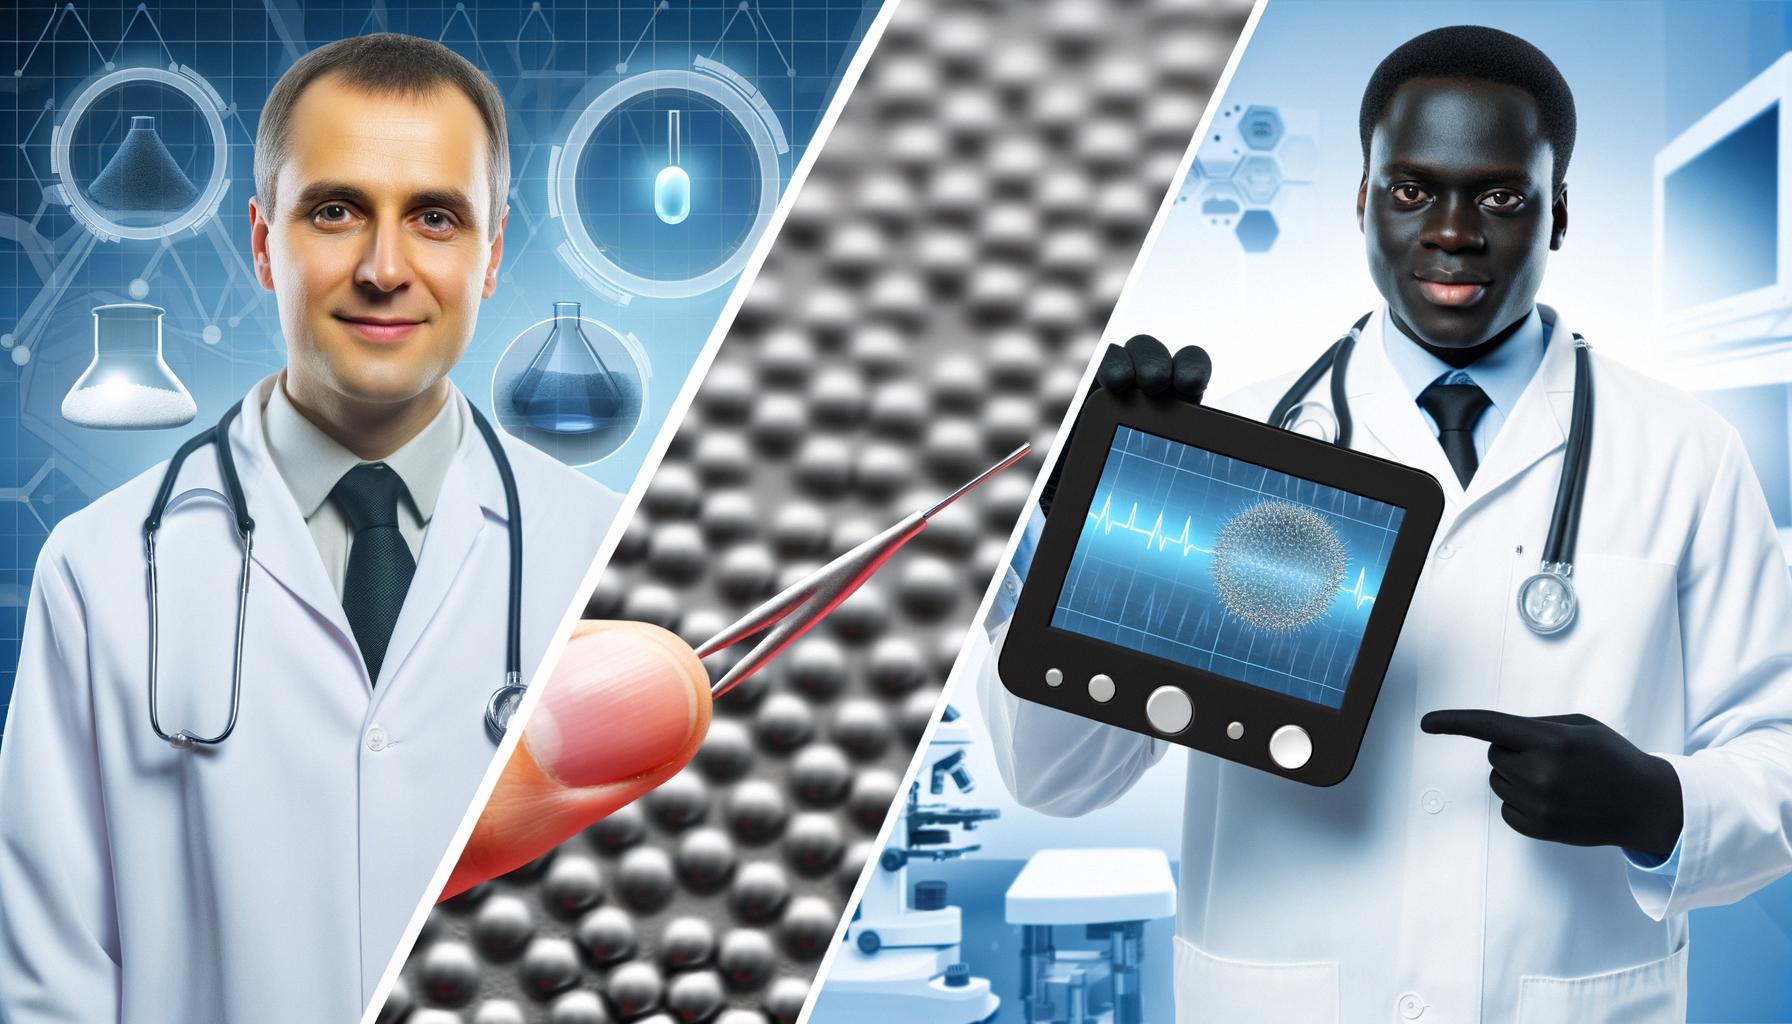 Nanotechnology offers innovative medical and diagnostic applications Balanced News